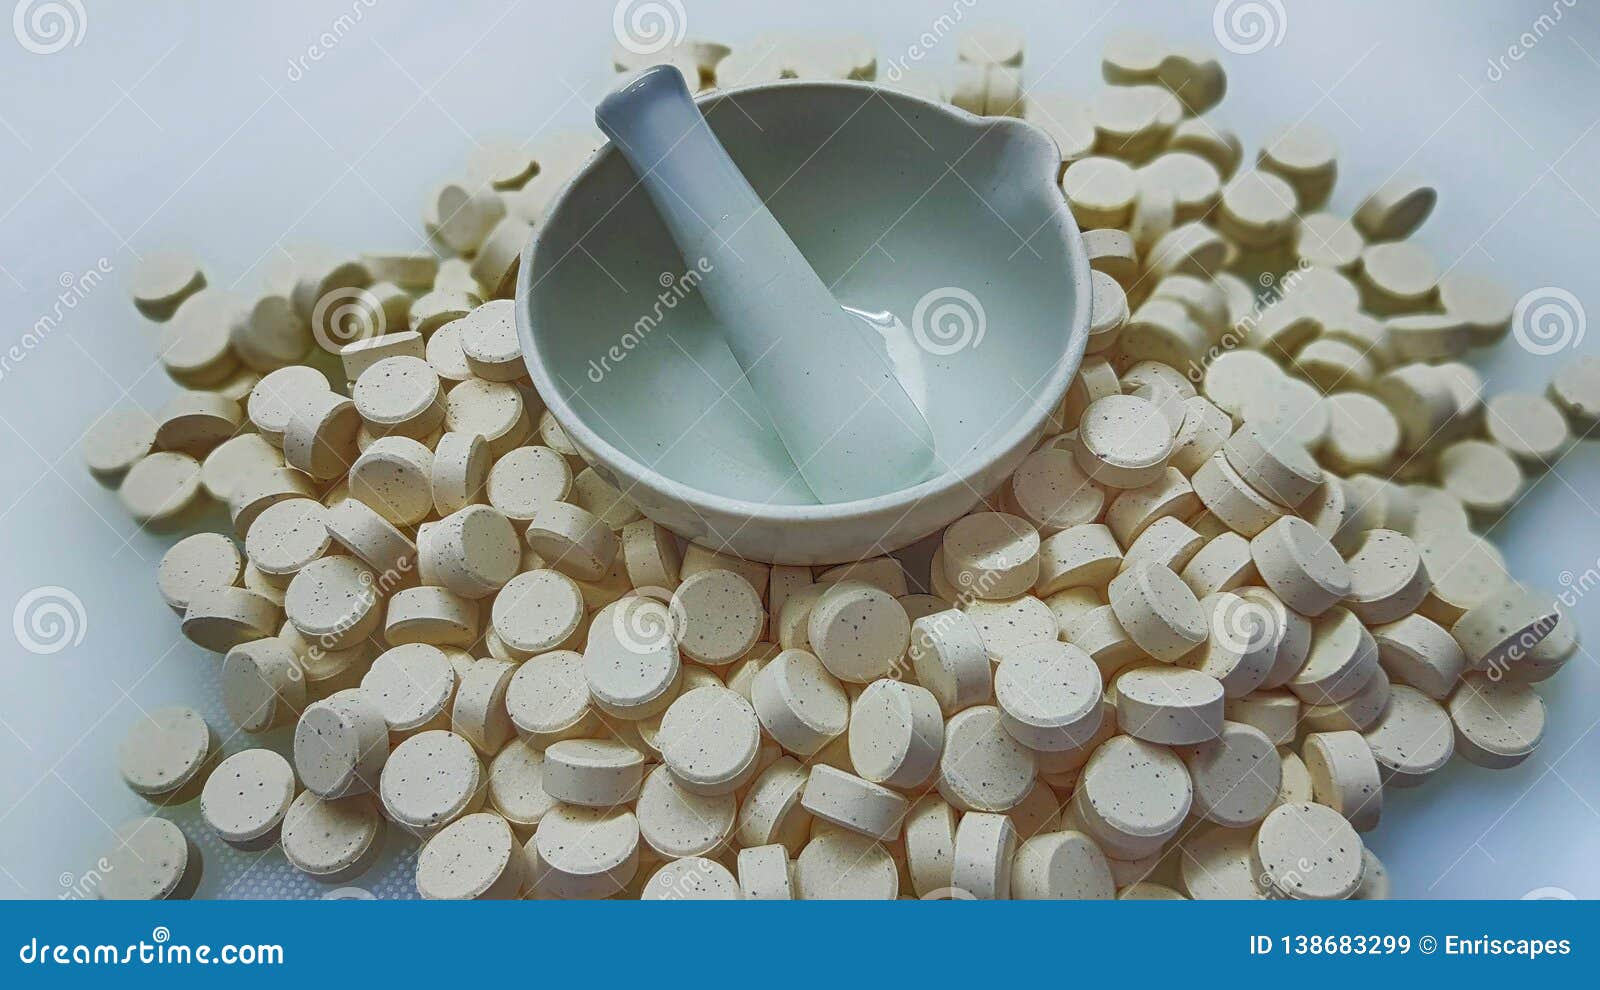 tablets compounding